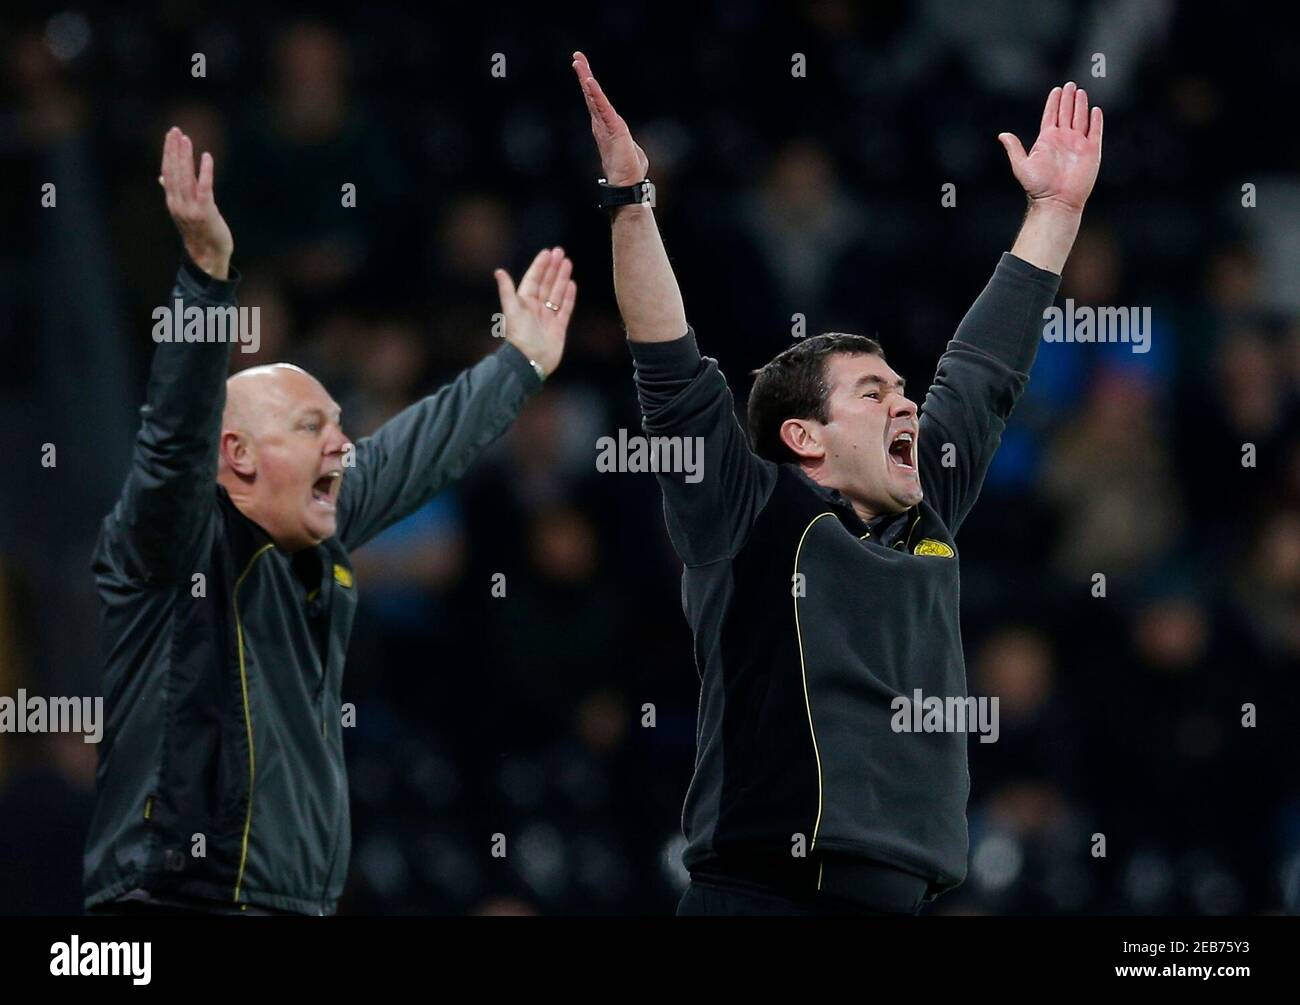 Britain Football Soccer - Derby County v Burton Albion - Sky Bet  Championship - Pride Park - 21/2/17 Burton Albion's manager Nigel Clough and  coach Andy Garner react Mandatory Credit: Action Images /